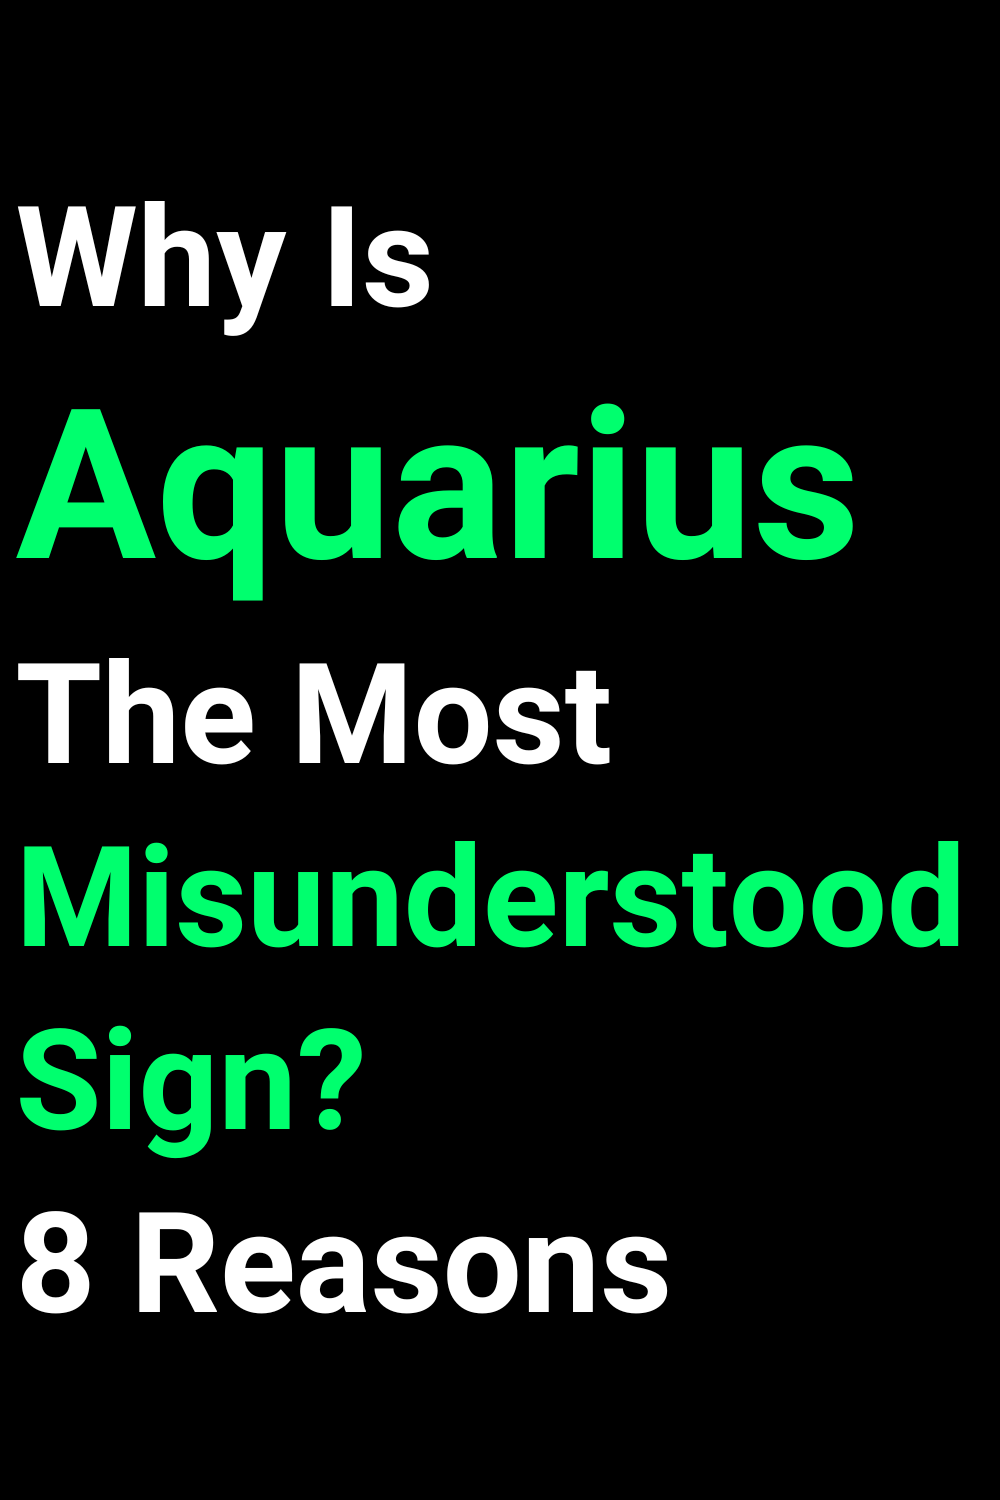 Why Is Aquarius The Most Misunderstood Sign? 8 Reasons